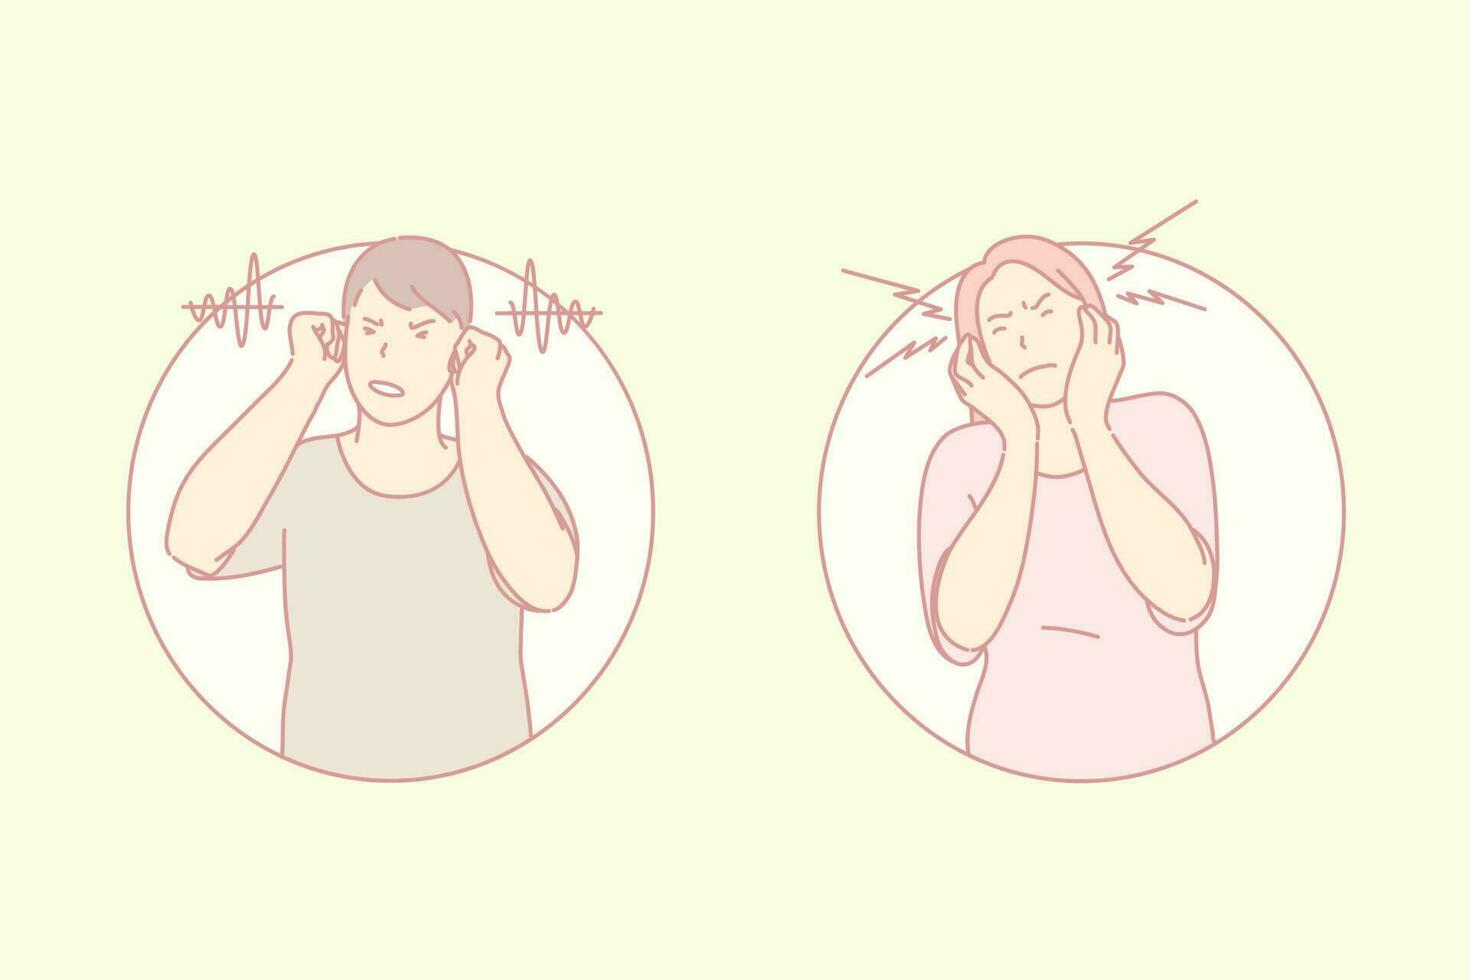 Refusal to listen, closing ears, hearing problem concept. Young man irritated with surrounding noise and sounds. Woman holding head, suffering from headache, migraine. Simple flat vector